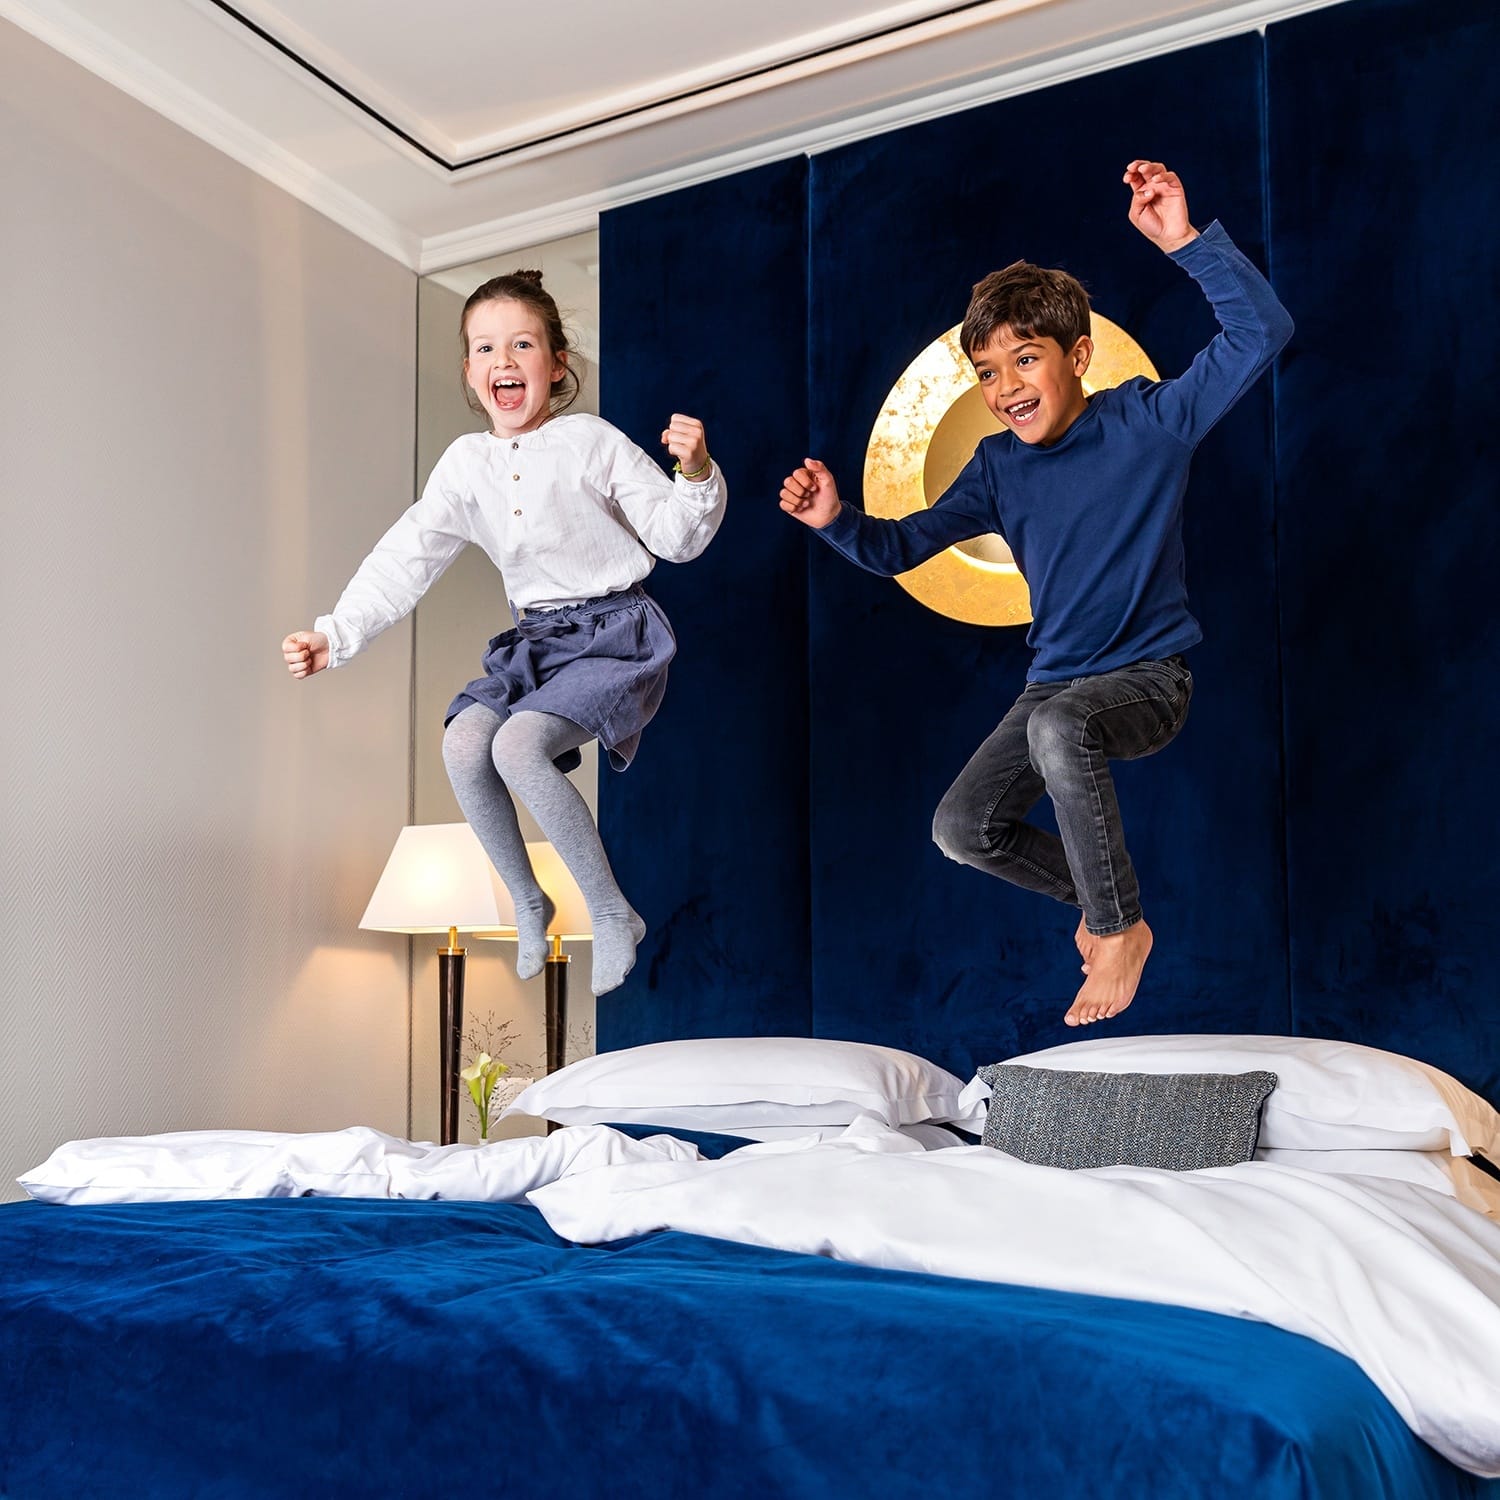 Children jumping on a bed at 5 star hotel in Cologne